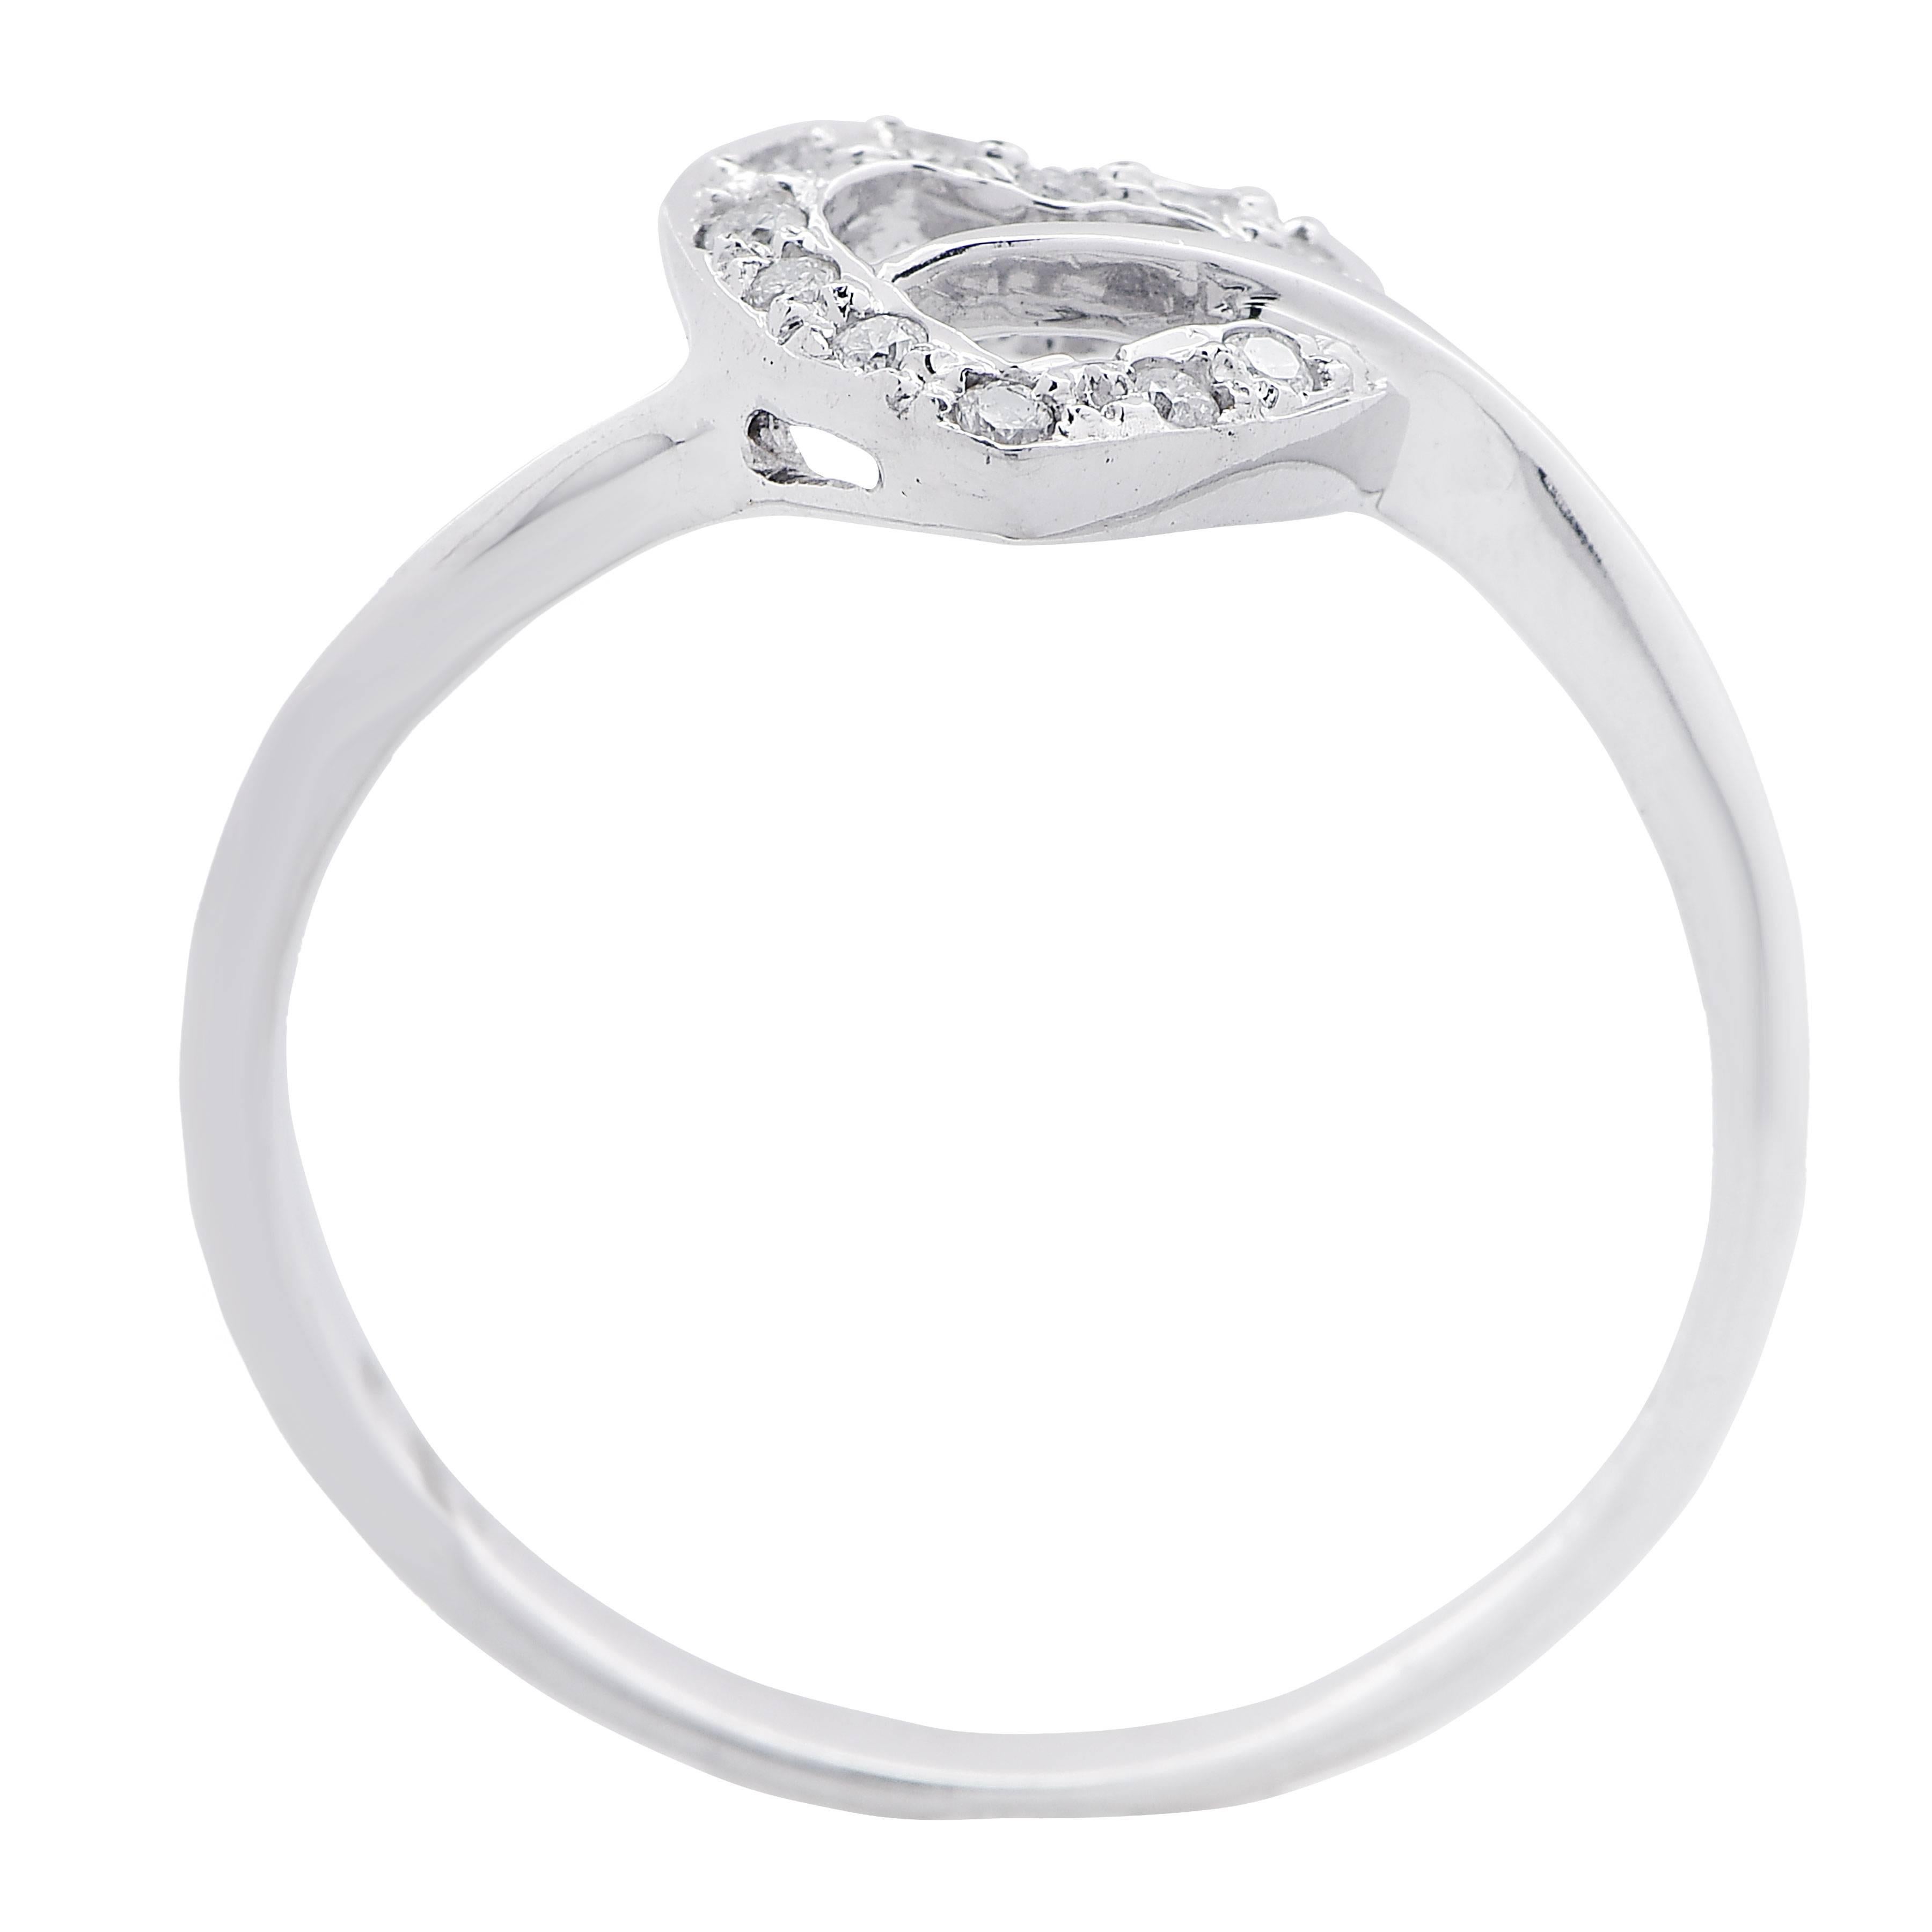 Petite Heart Diamond White Gold Ring In Excellent Condition For Sale In Bay Harbor Islands, FL